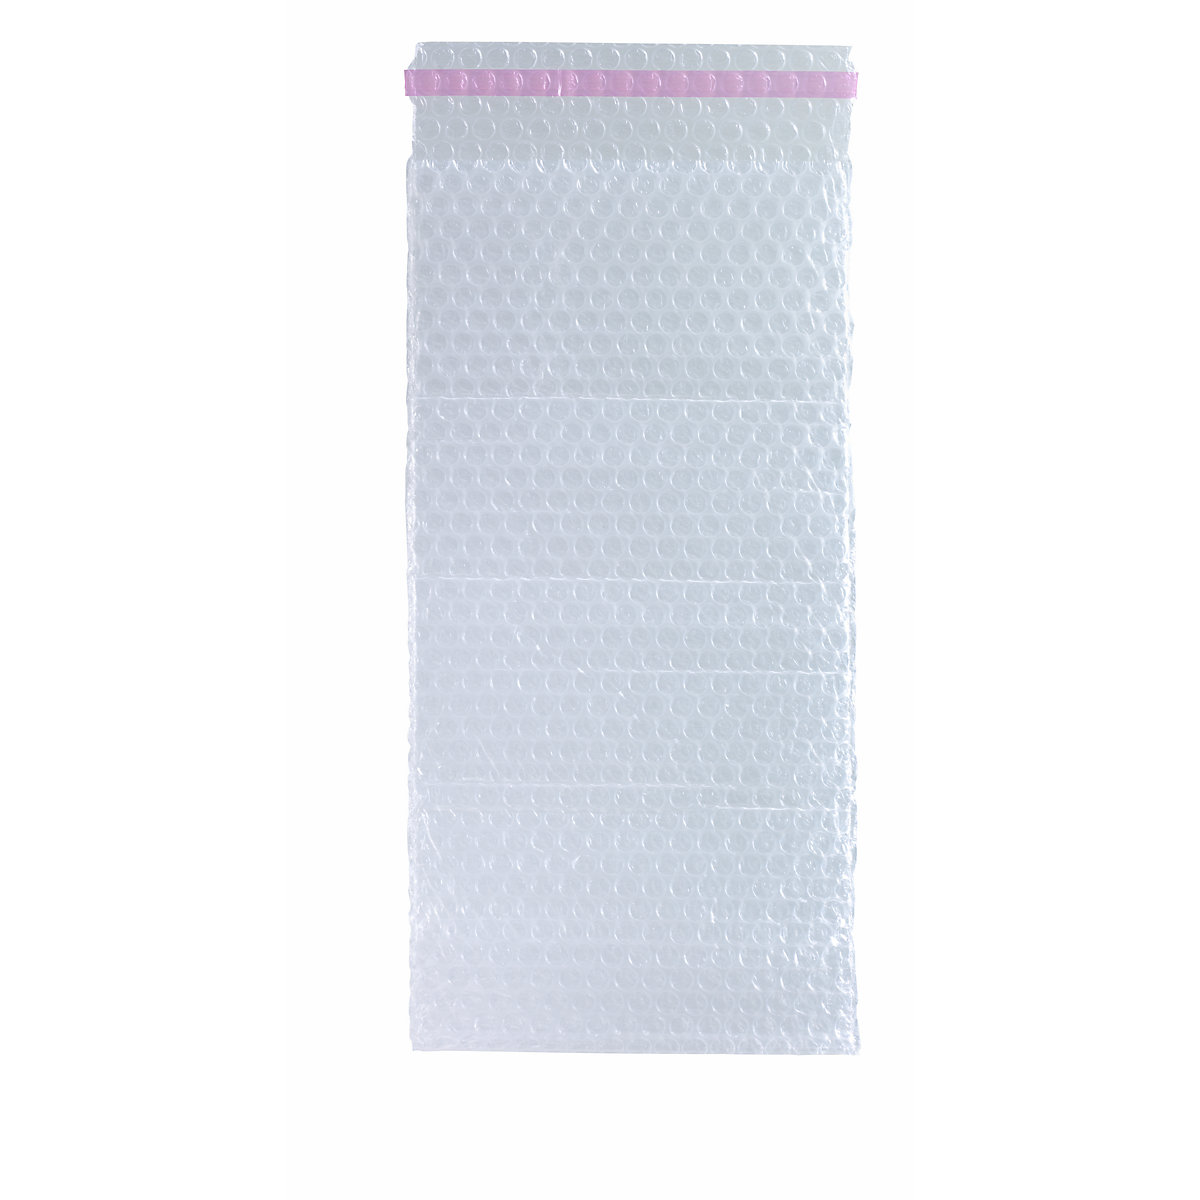 Bubble wrap film bag, 3-ply, self adhesive, film thickness 80 µm, WxL 200 x 400 mm, pack of 250-3